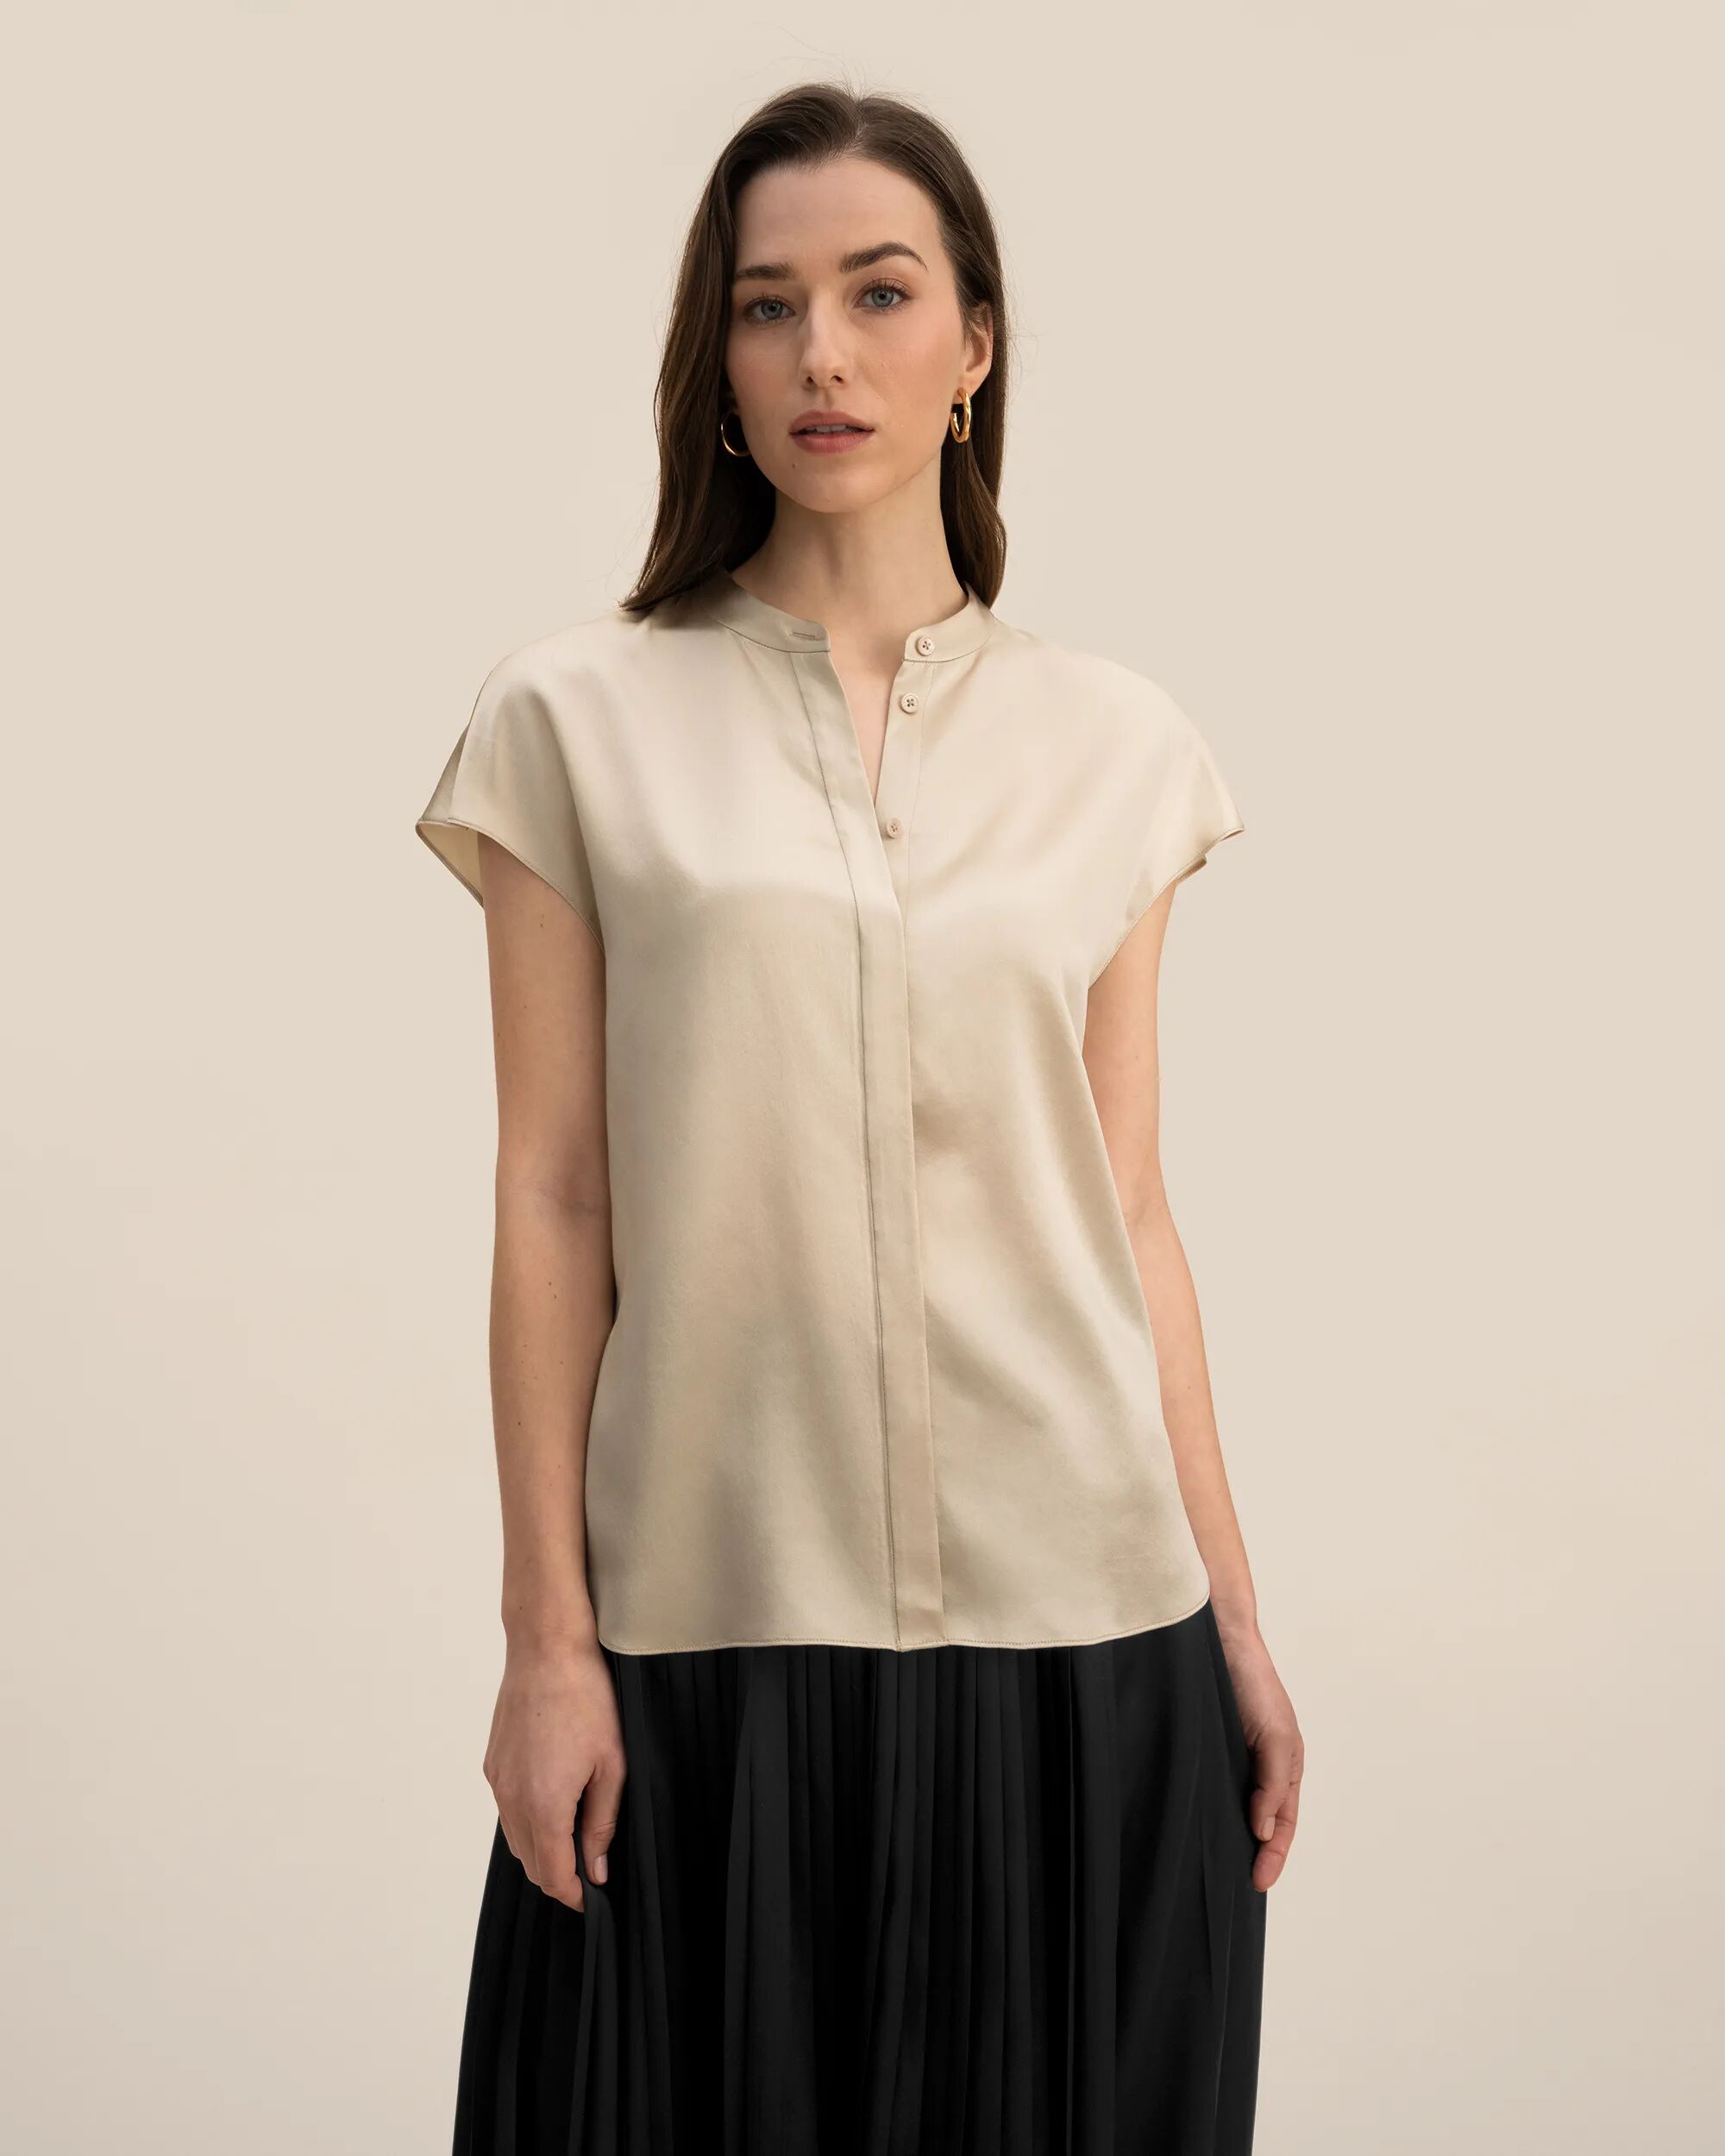 LILYSILK Business Beige Blouse With Short Sleeves And V-Neck   Silk   Silk Women Stand Collar Taupe M